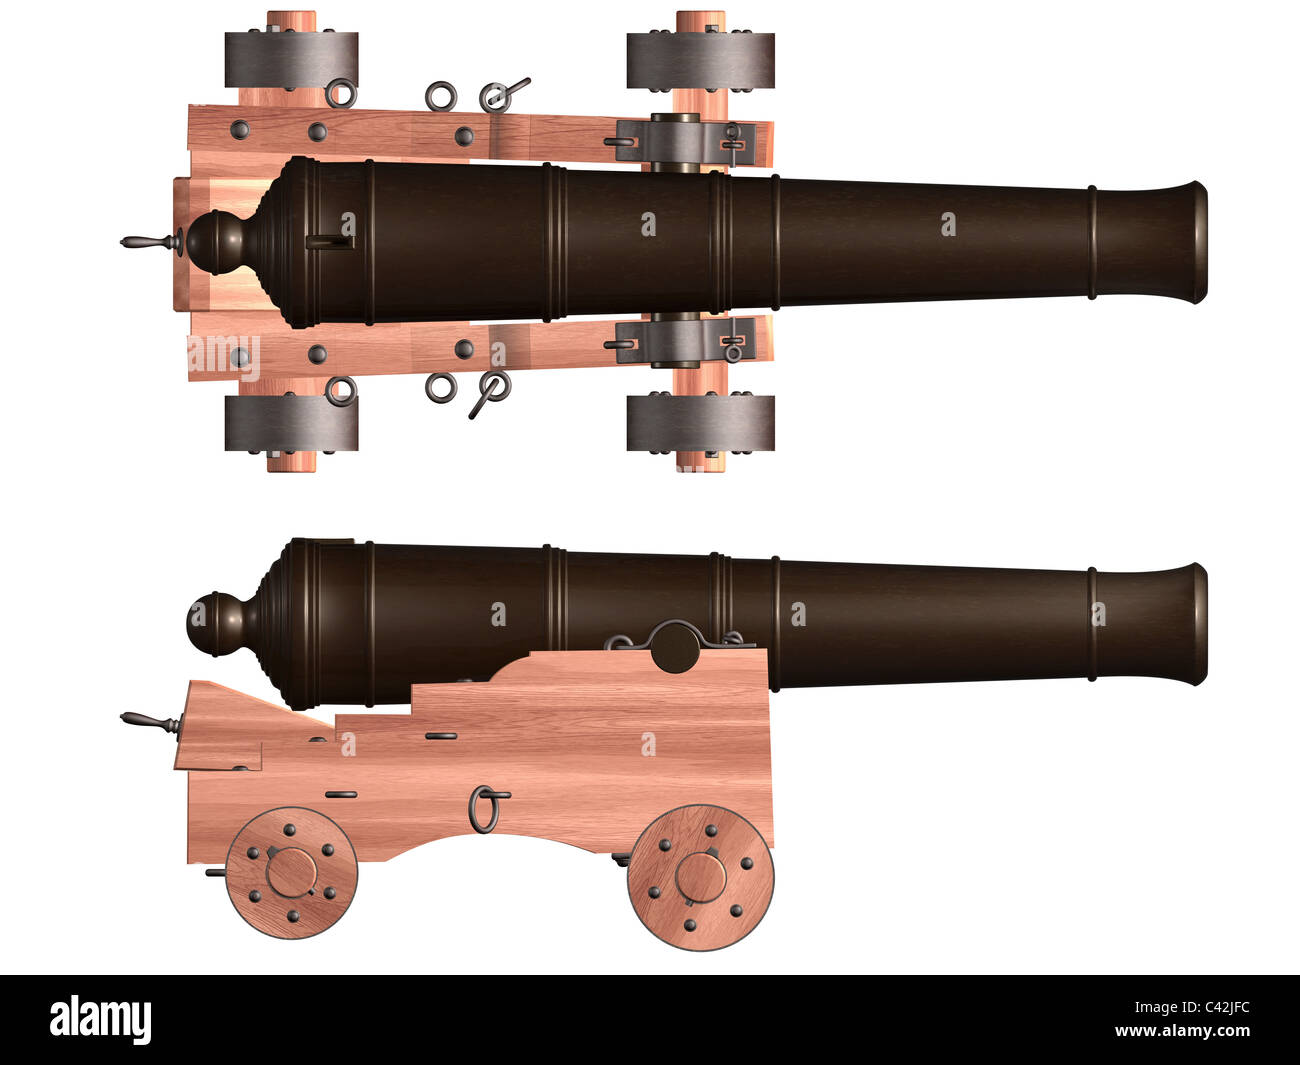 Isolated illustration of an antique ships cannon Stock Photo